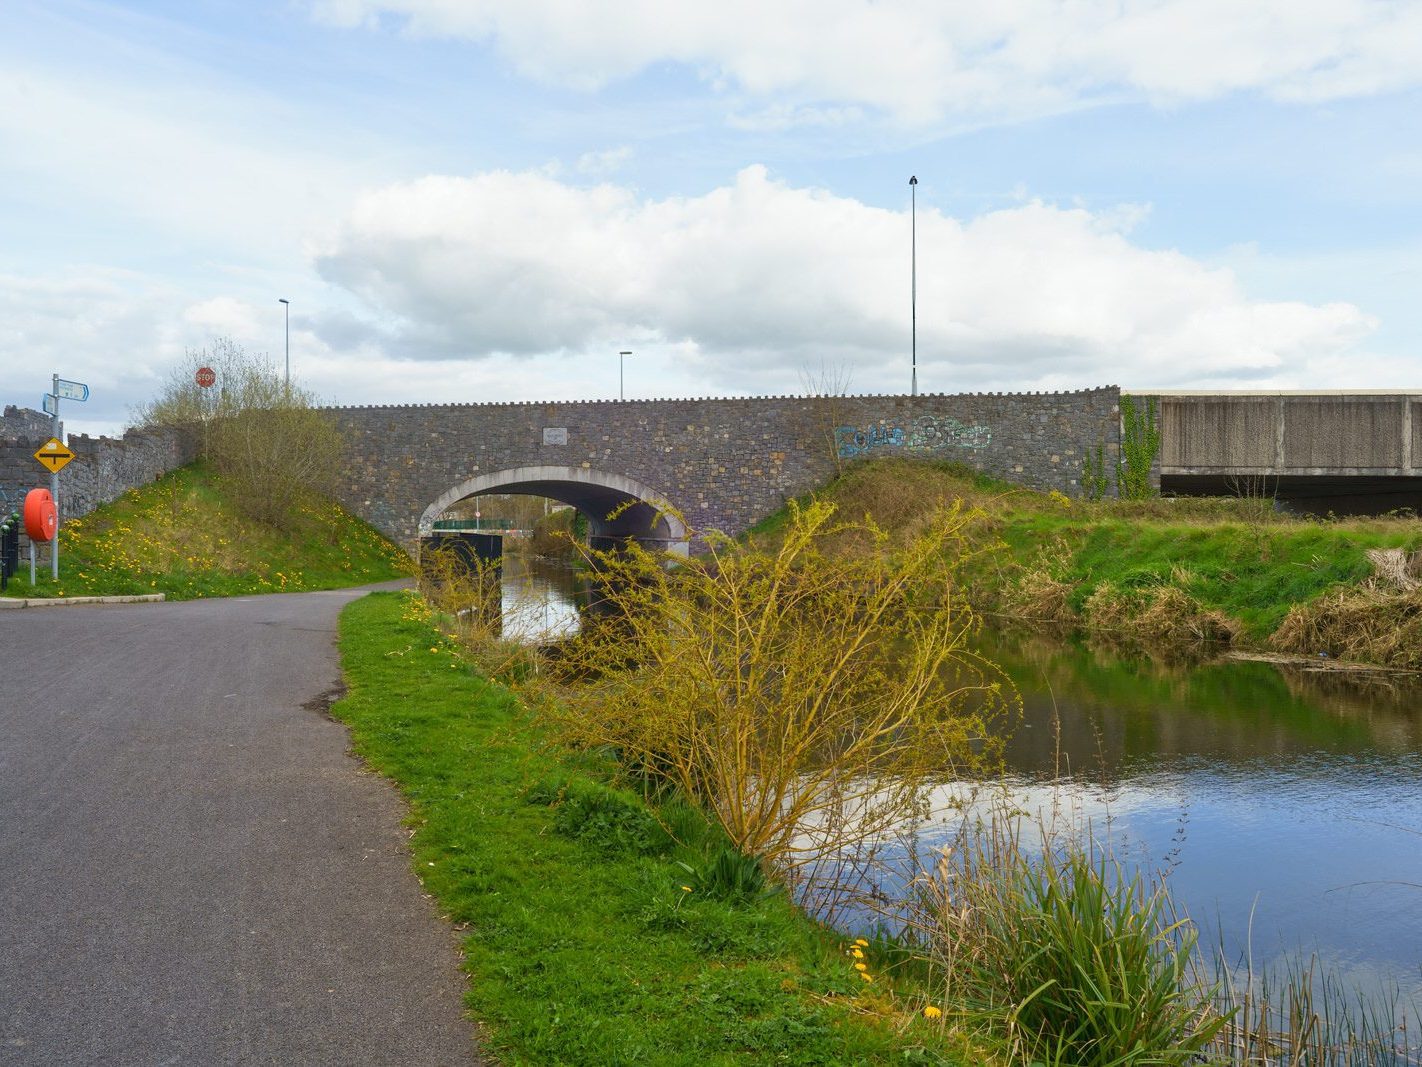 BOND BRIDGE ACROSS THE ROYAL CANAL IN MAYNOOTH [I WAS UNAWARE OF THIS BRIDGE UNTIL TODAY] 004